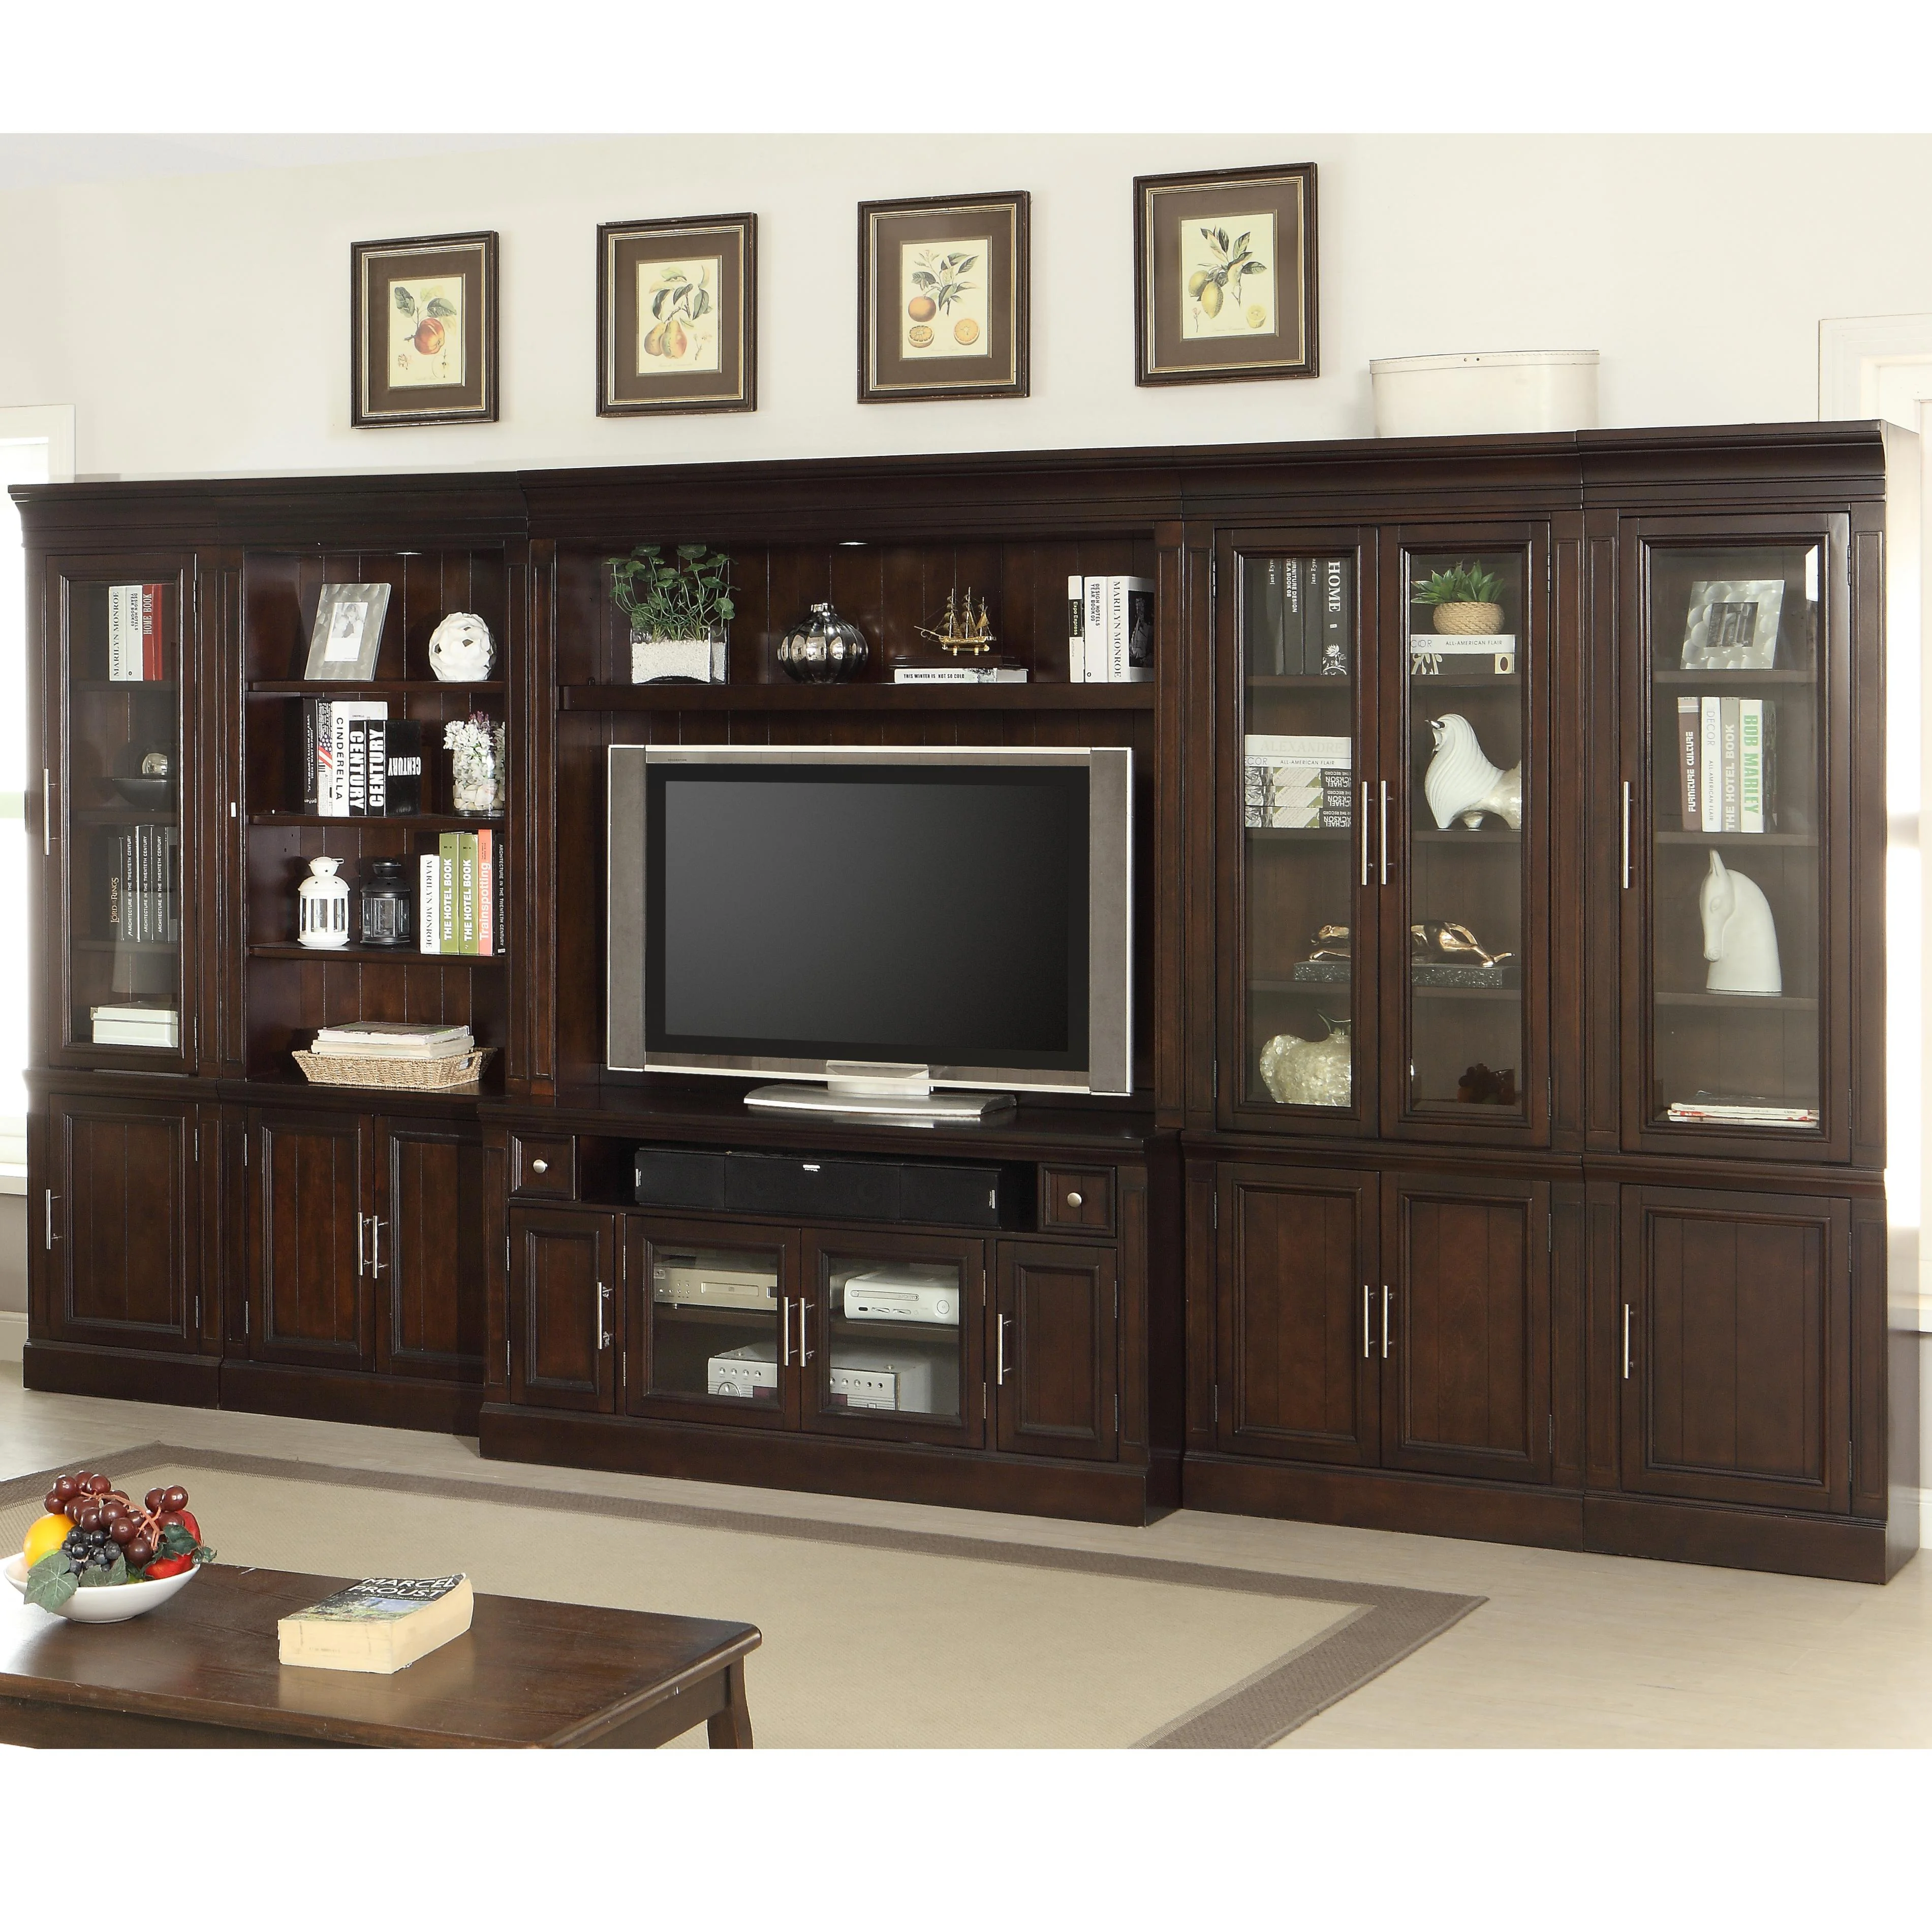 Parker House Stanford STA Wall Unit 7 Wall Unit with TV Console, Brown  Squirrel Furniture